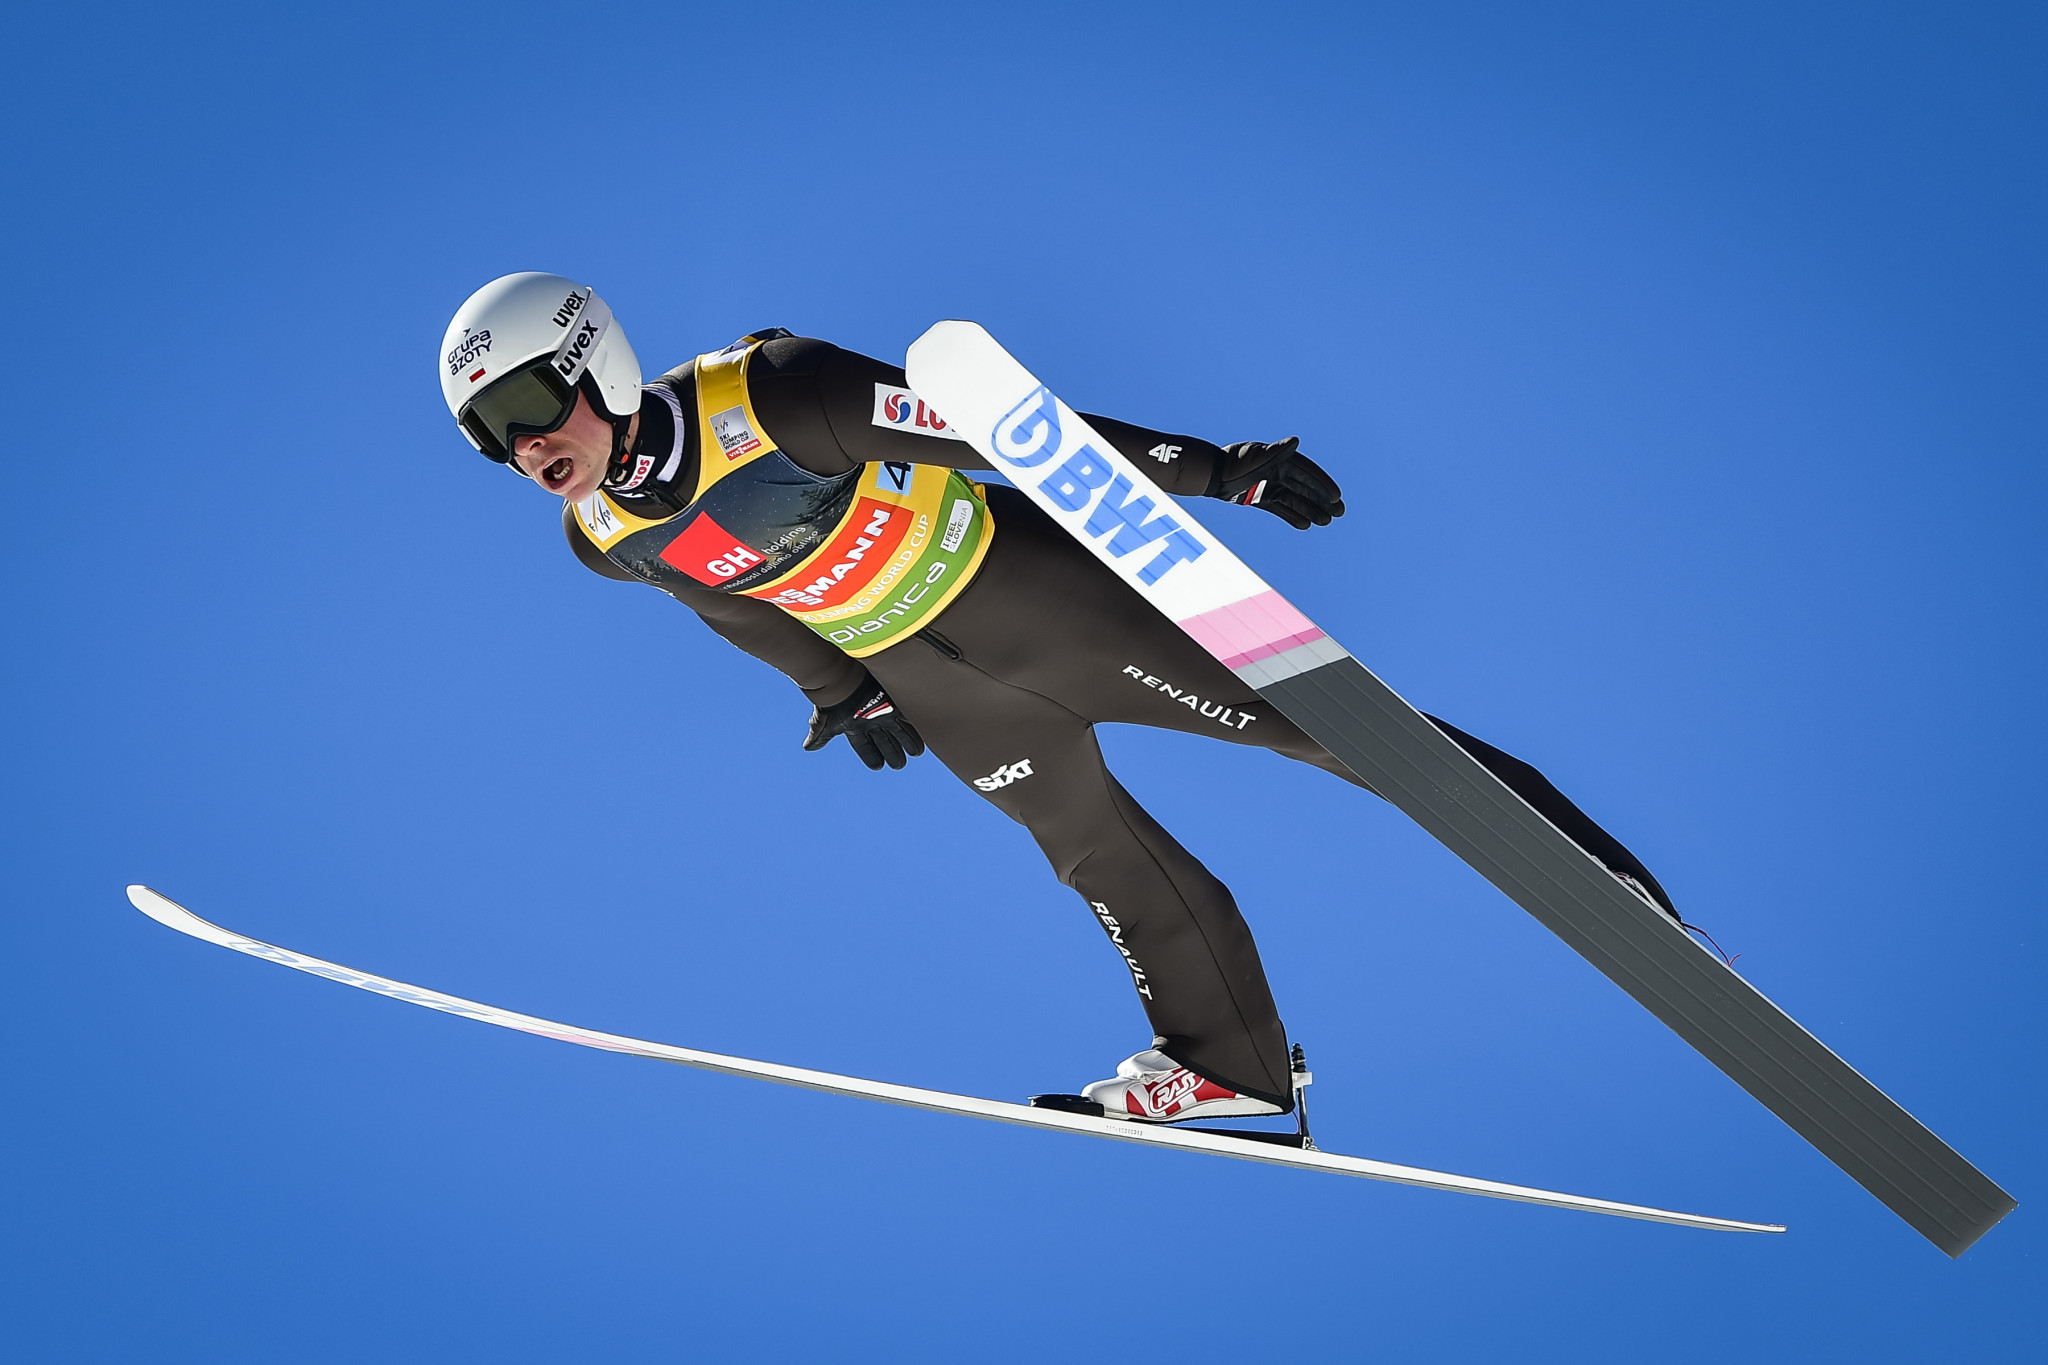 Poland triumph in final team event of Ski Jumping World Cup season in Planica